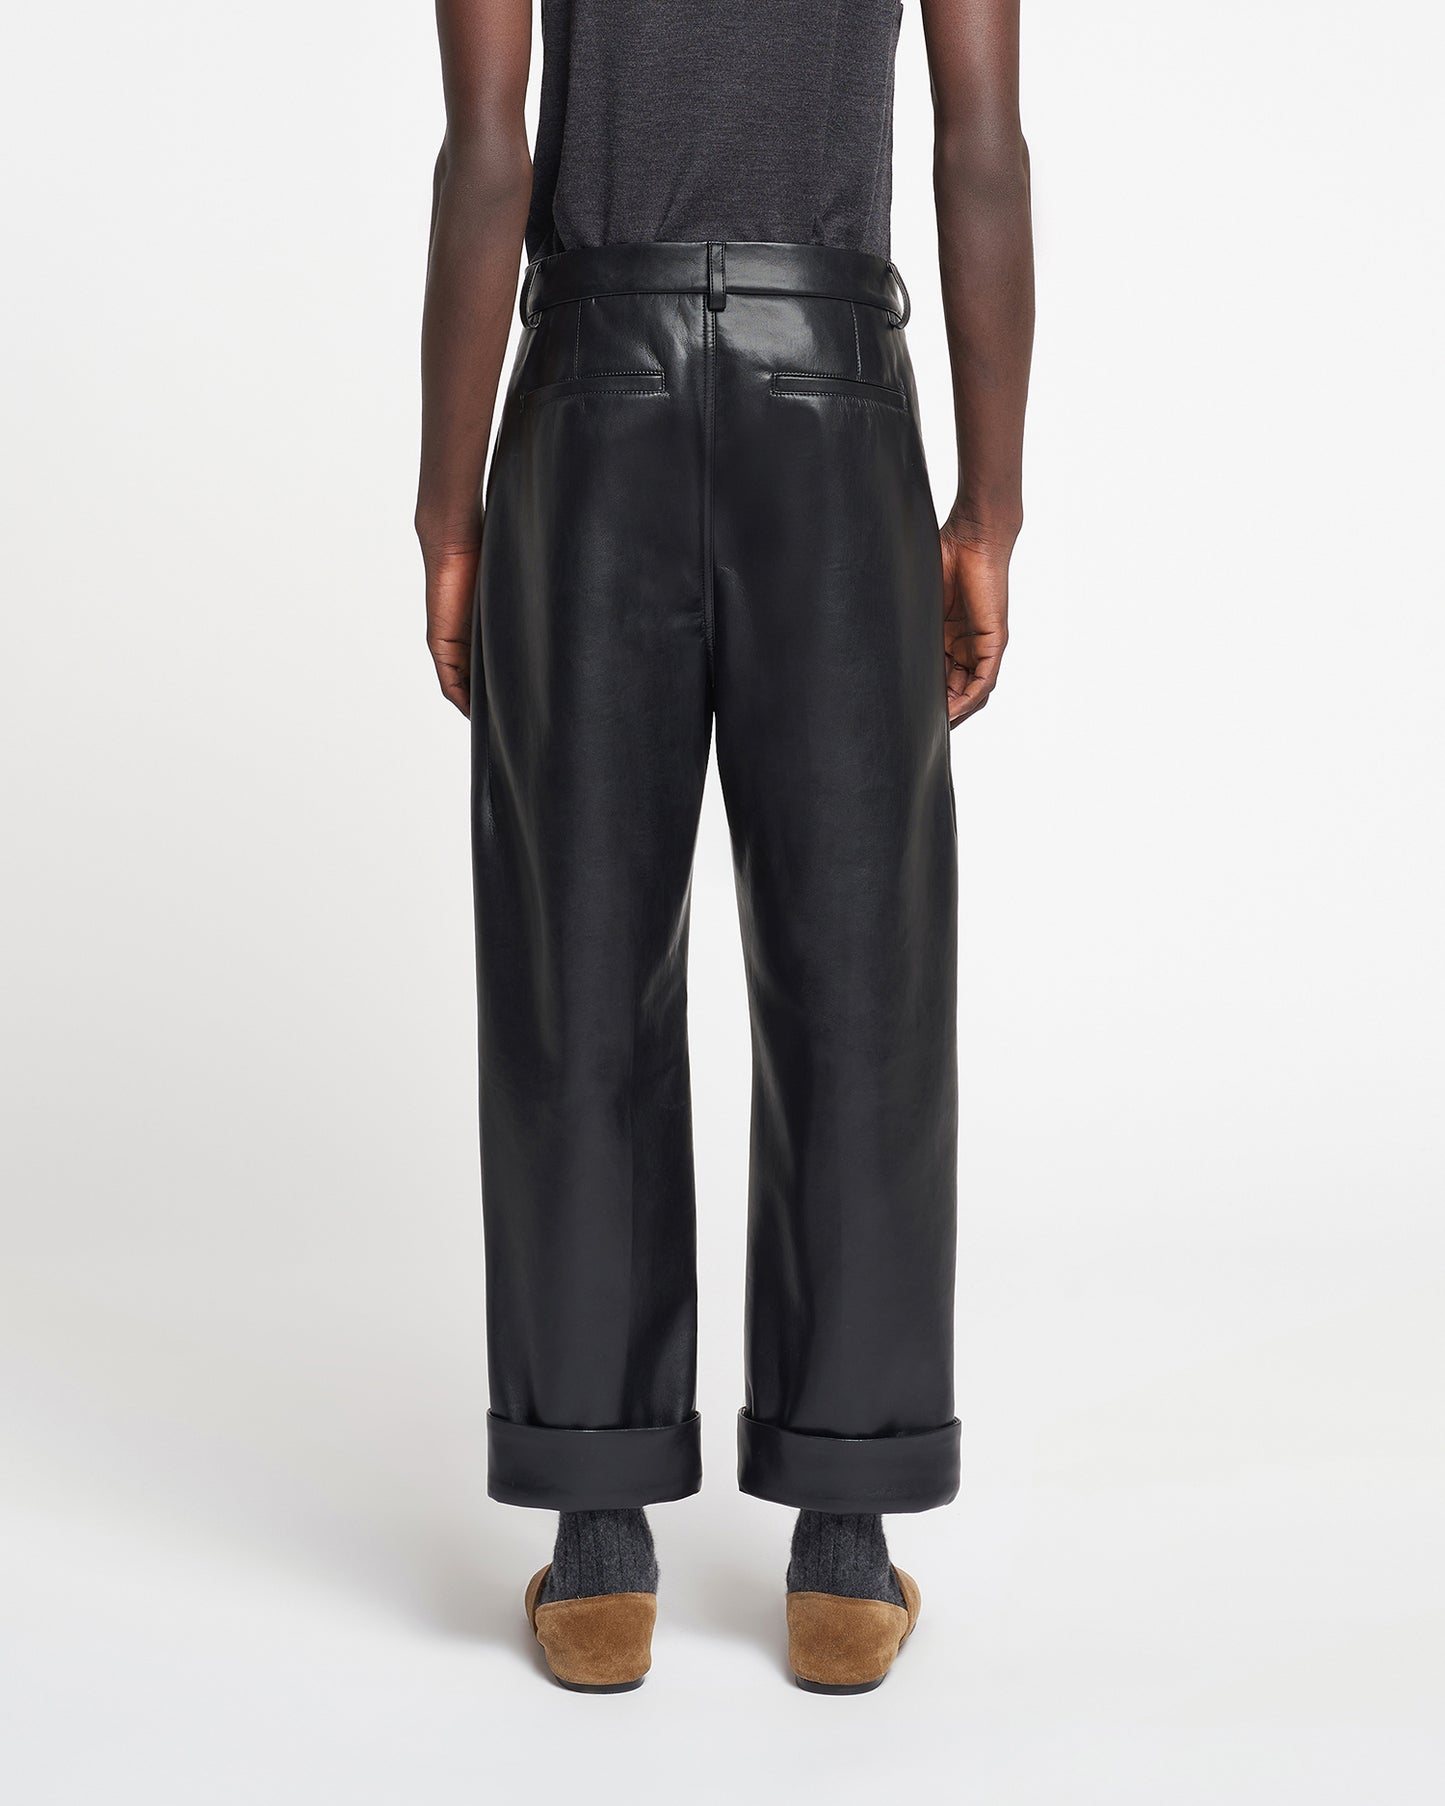 Zayden - Regenerated Leather Tapered Pants - Black